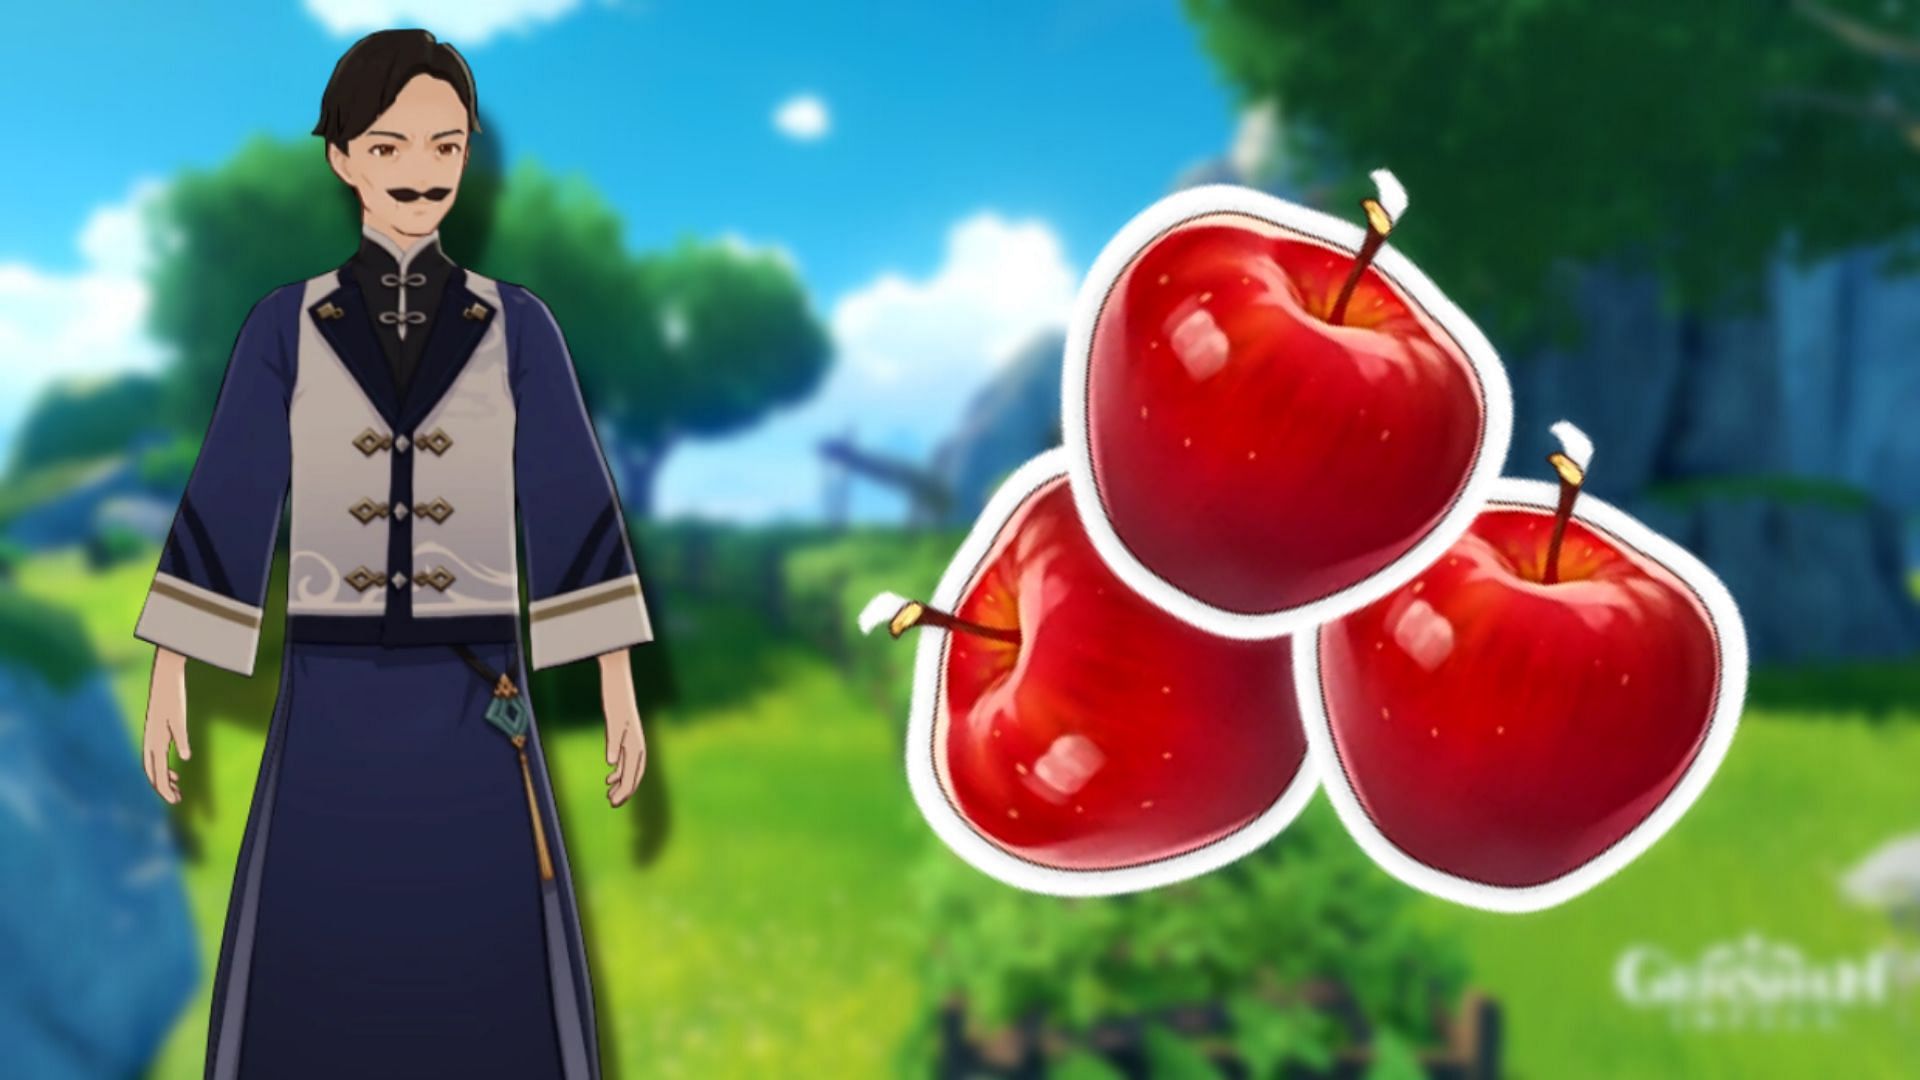 Apples can be foraged from the wild or bought from Bolai (Image via Genshin Impact)